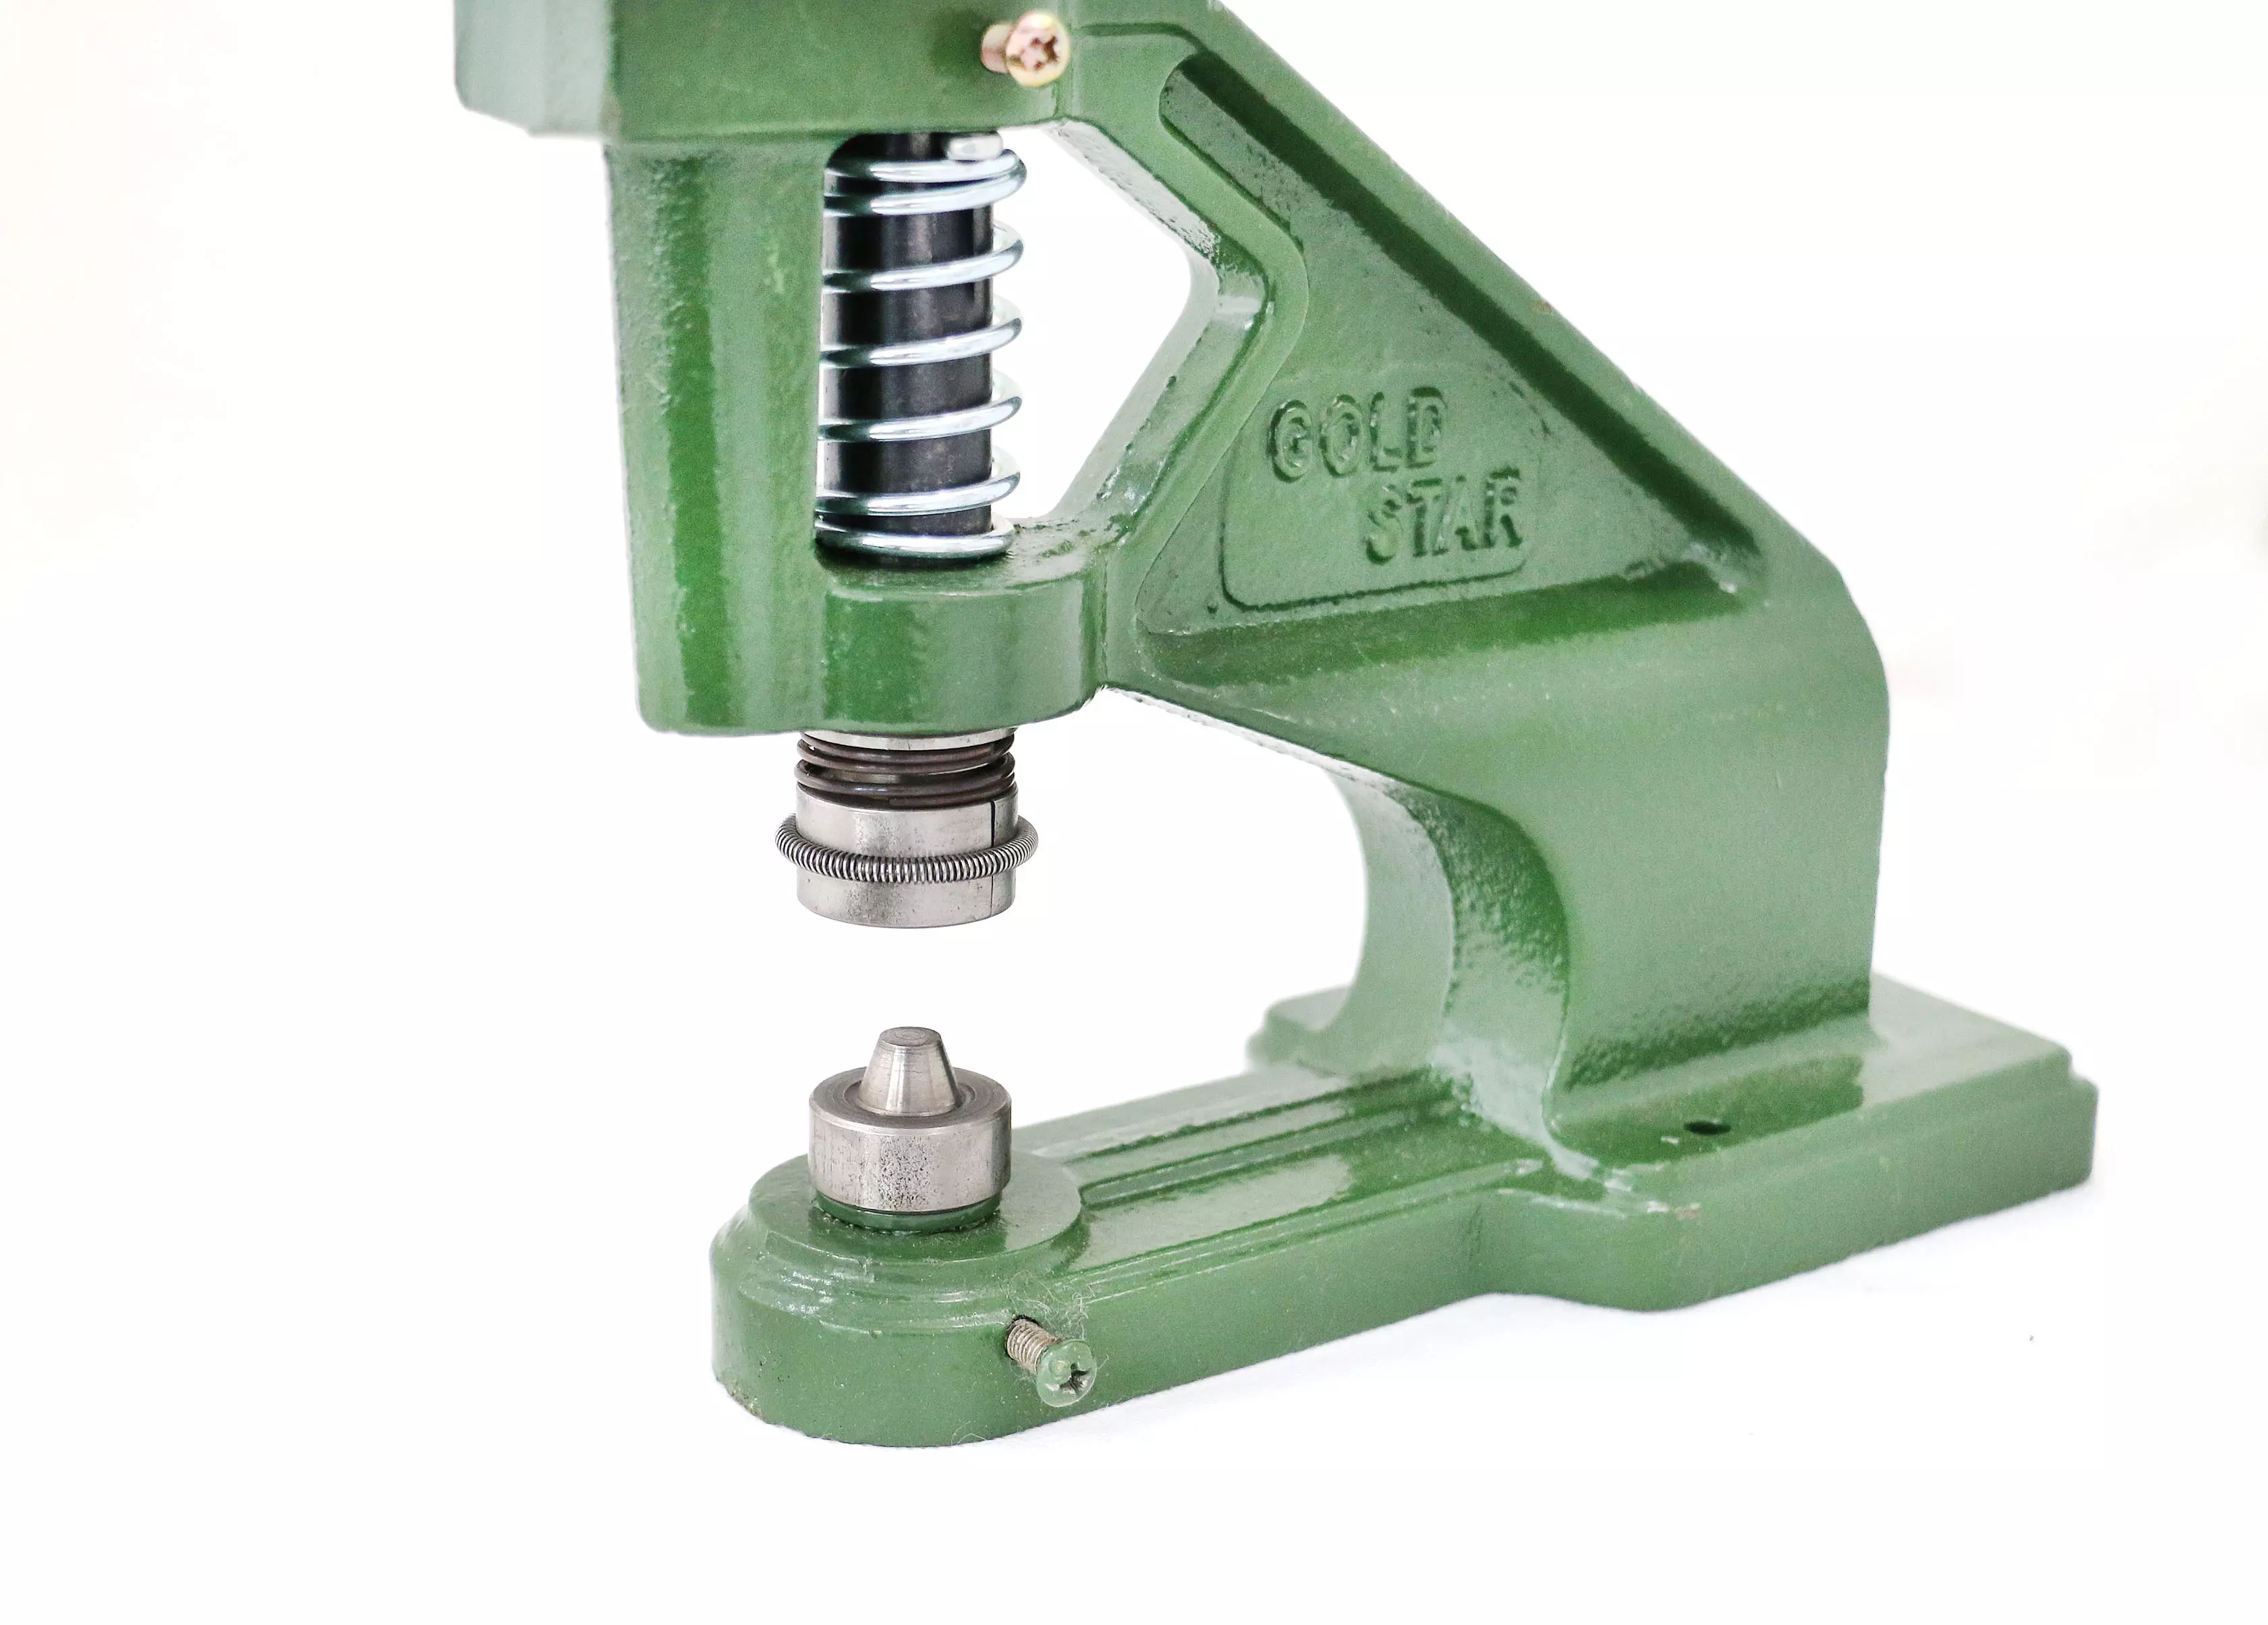 Heavy Duty Press for Grommets, Snaps, Buttons & Rivets UNIT ONLY